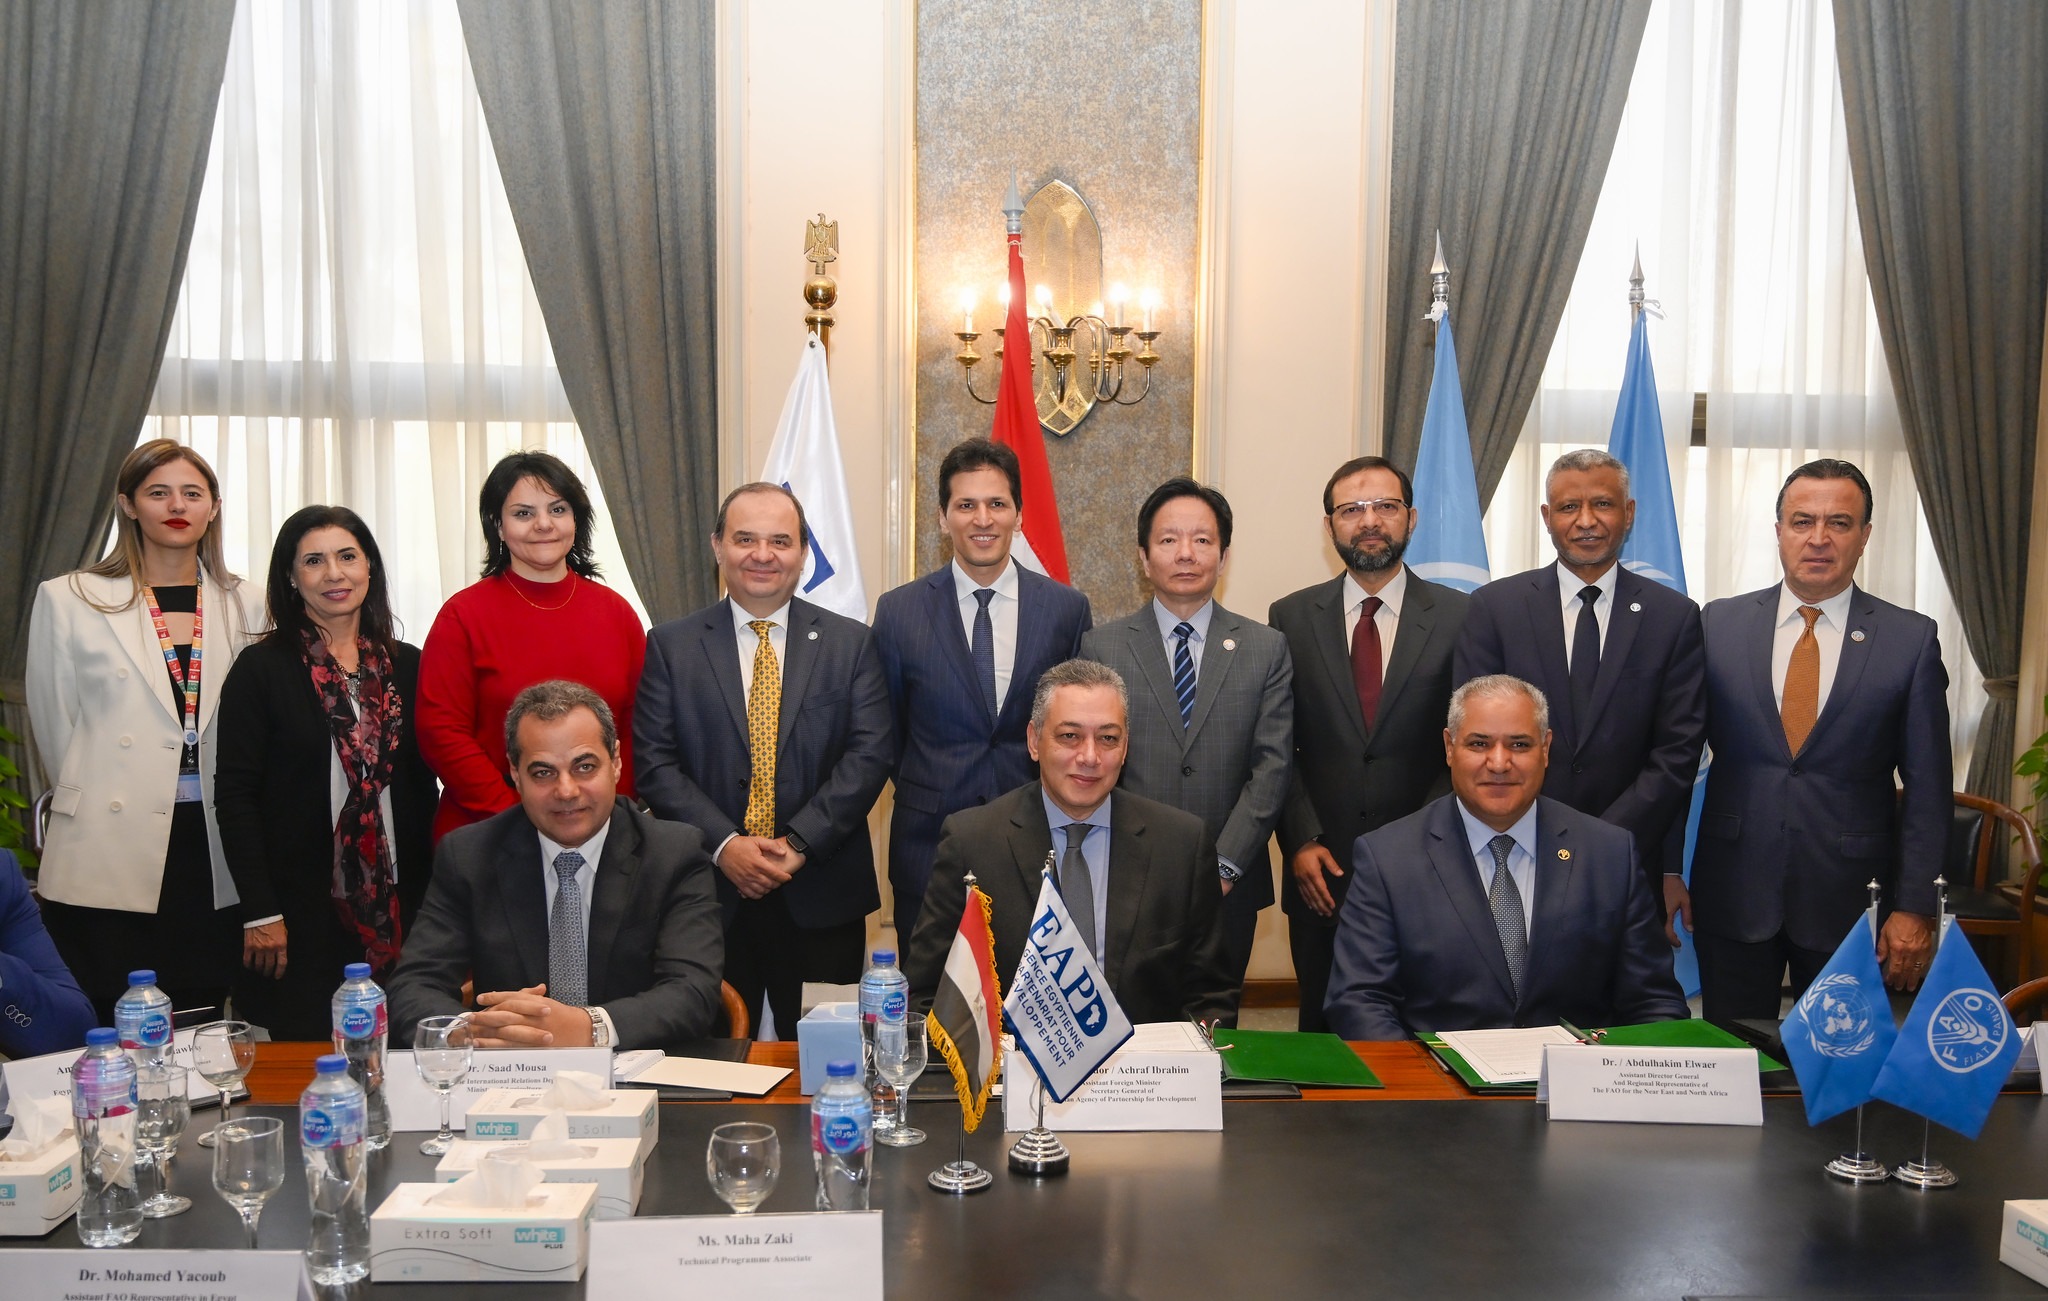 FAO and EAPD Sign Agreement Promoting SSTC to Support the Transformation of Agrifood Systems & Improve Food Security